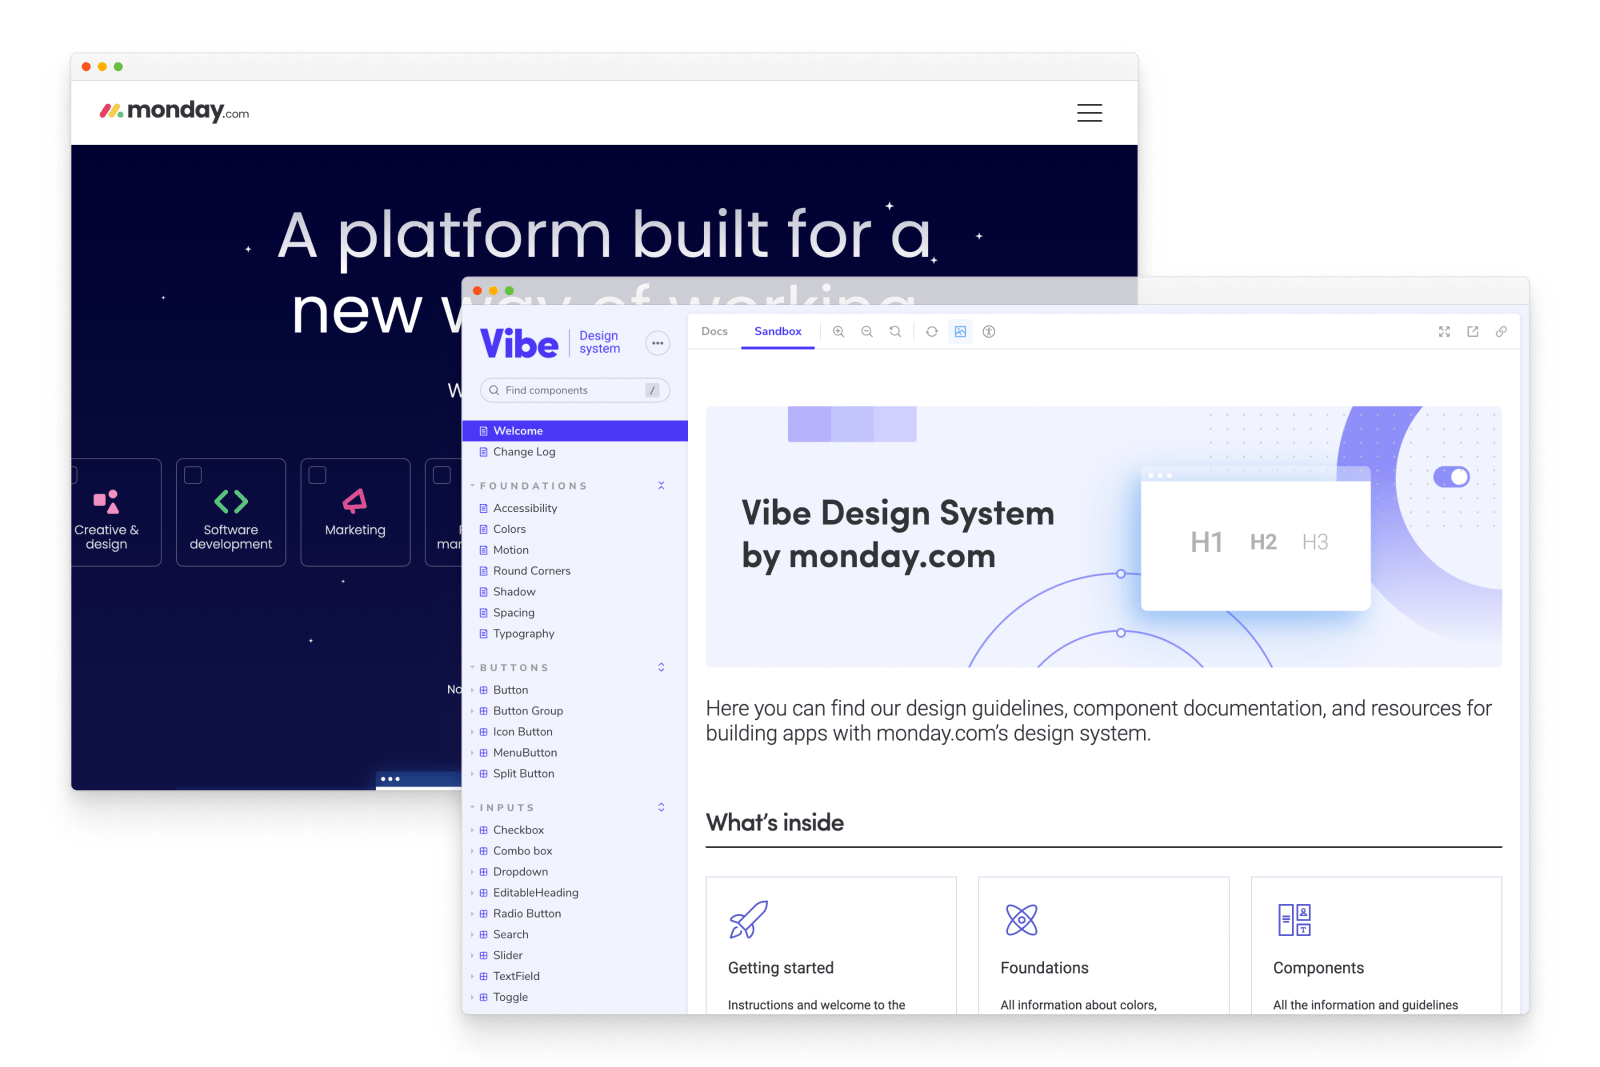 screenshots of the monday.com homepage and their Storybook design system, Vibe